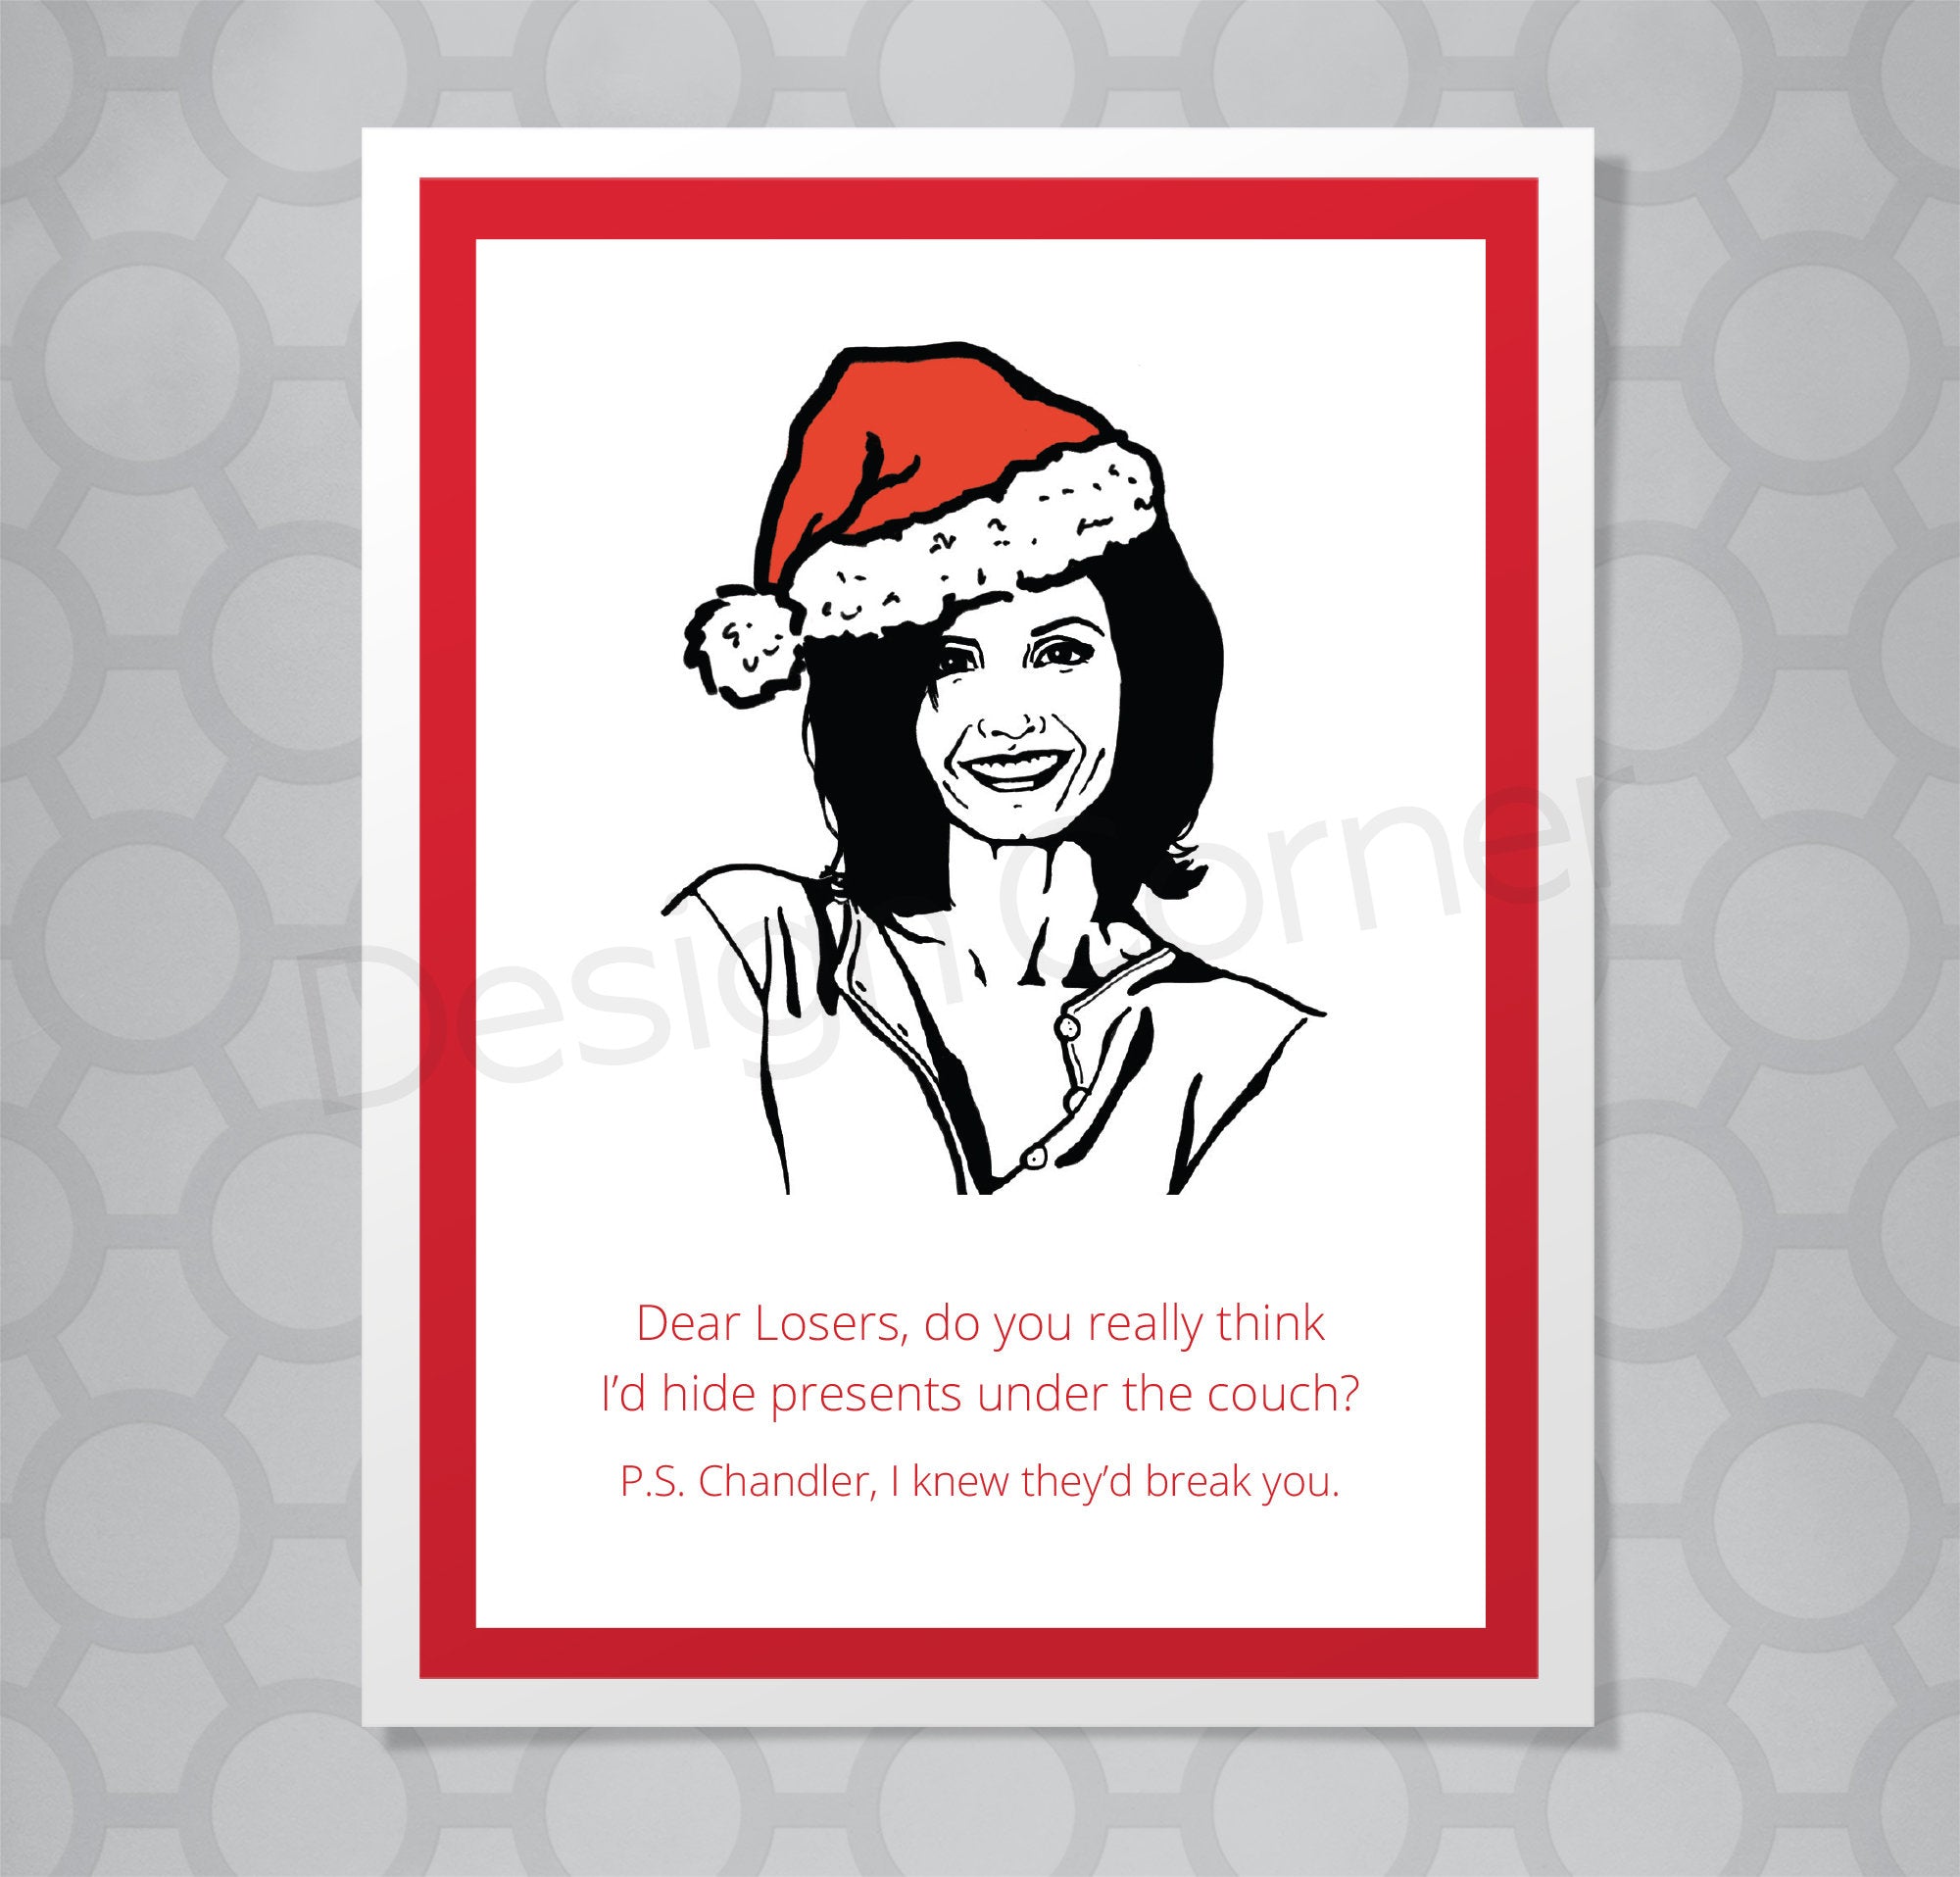 Illustration of Monica from Friends on a greeting card with caption "Dear Losers, do you really think I’d hide presents under the couch? P.S. Chandler, I knew they’d break you."